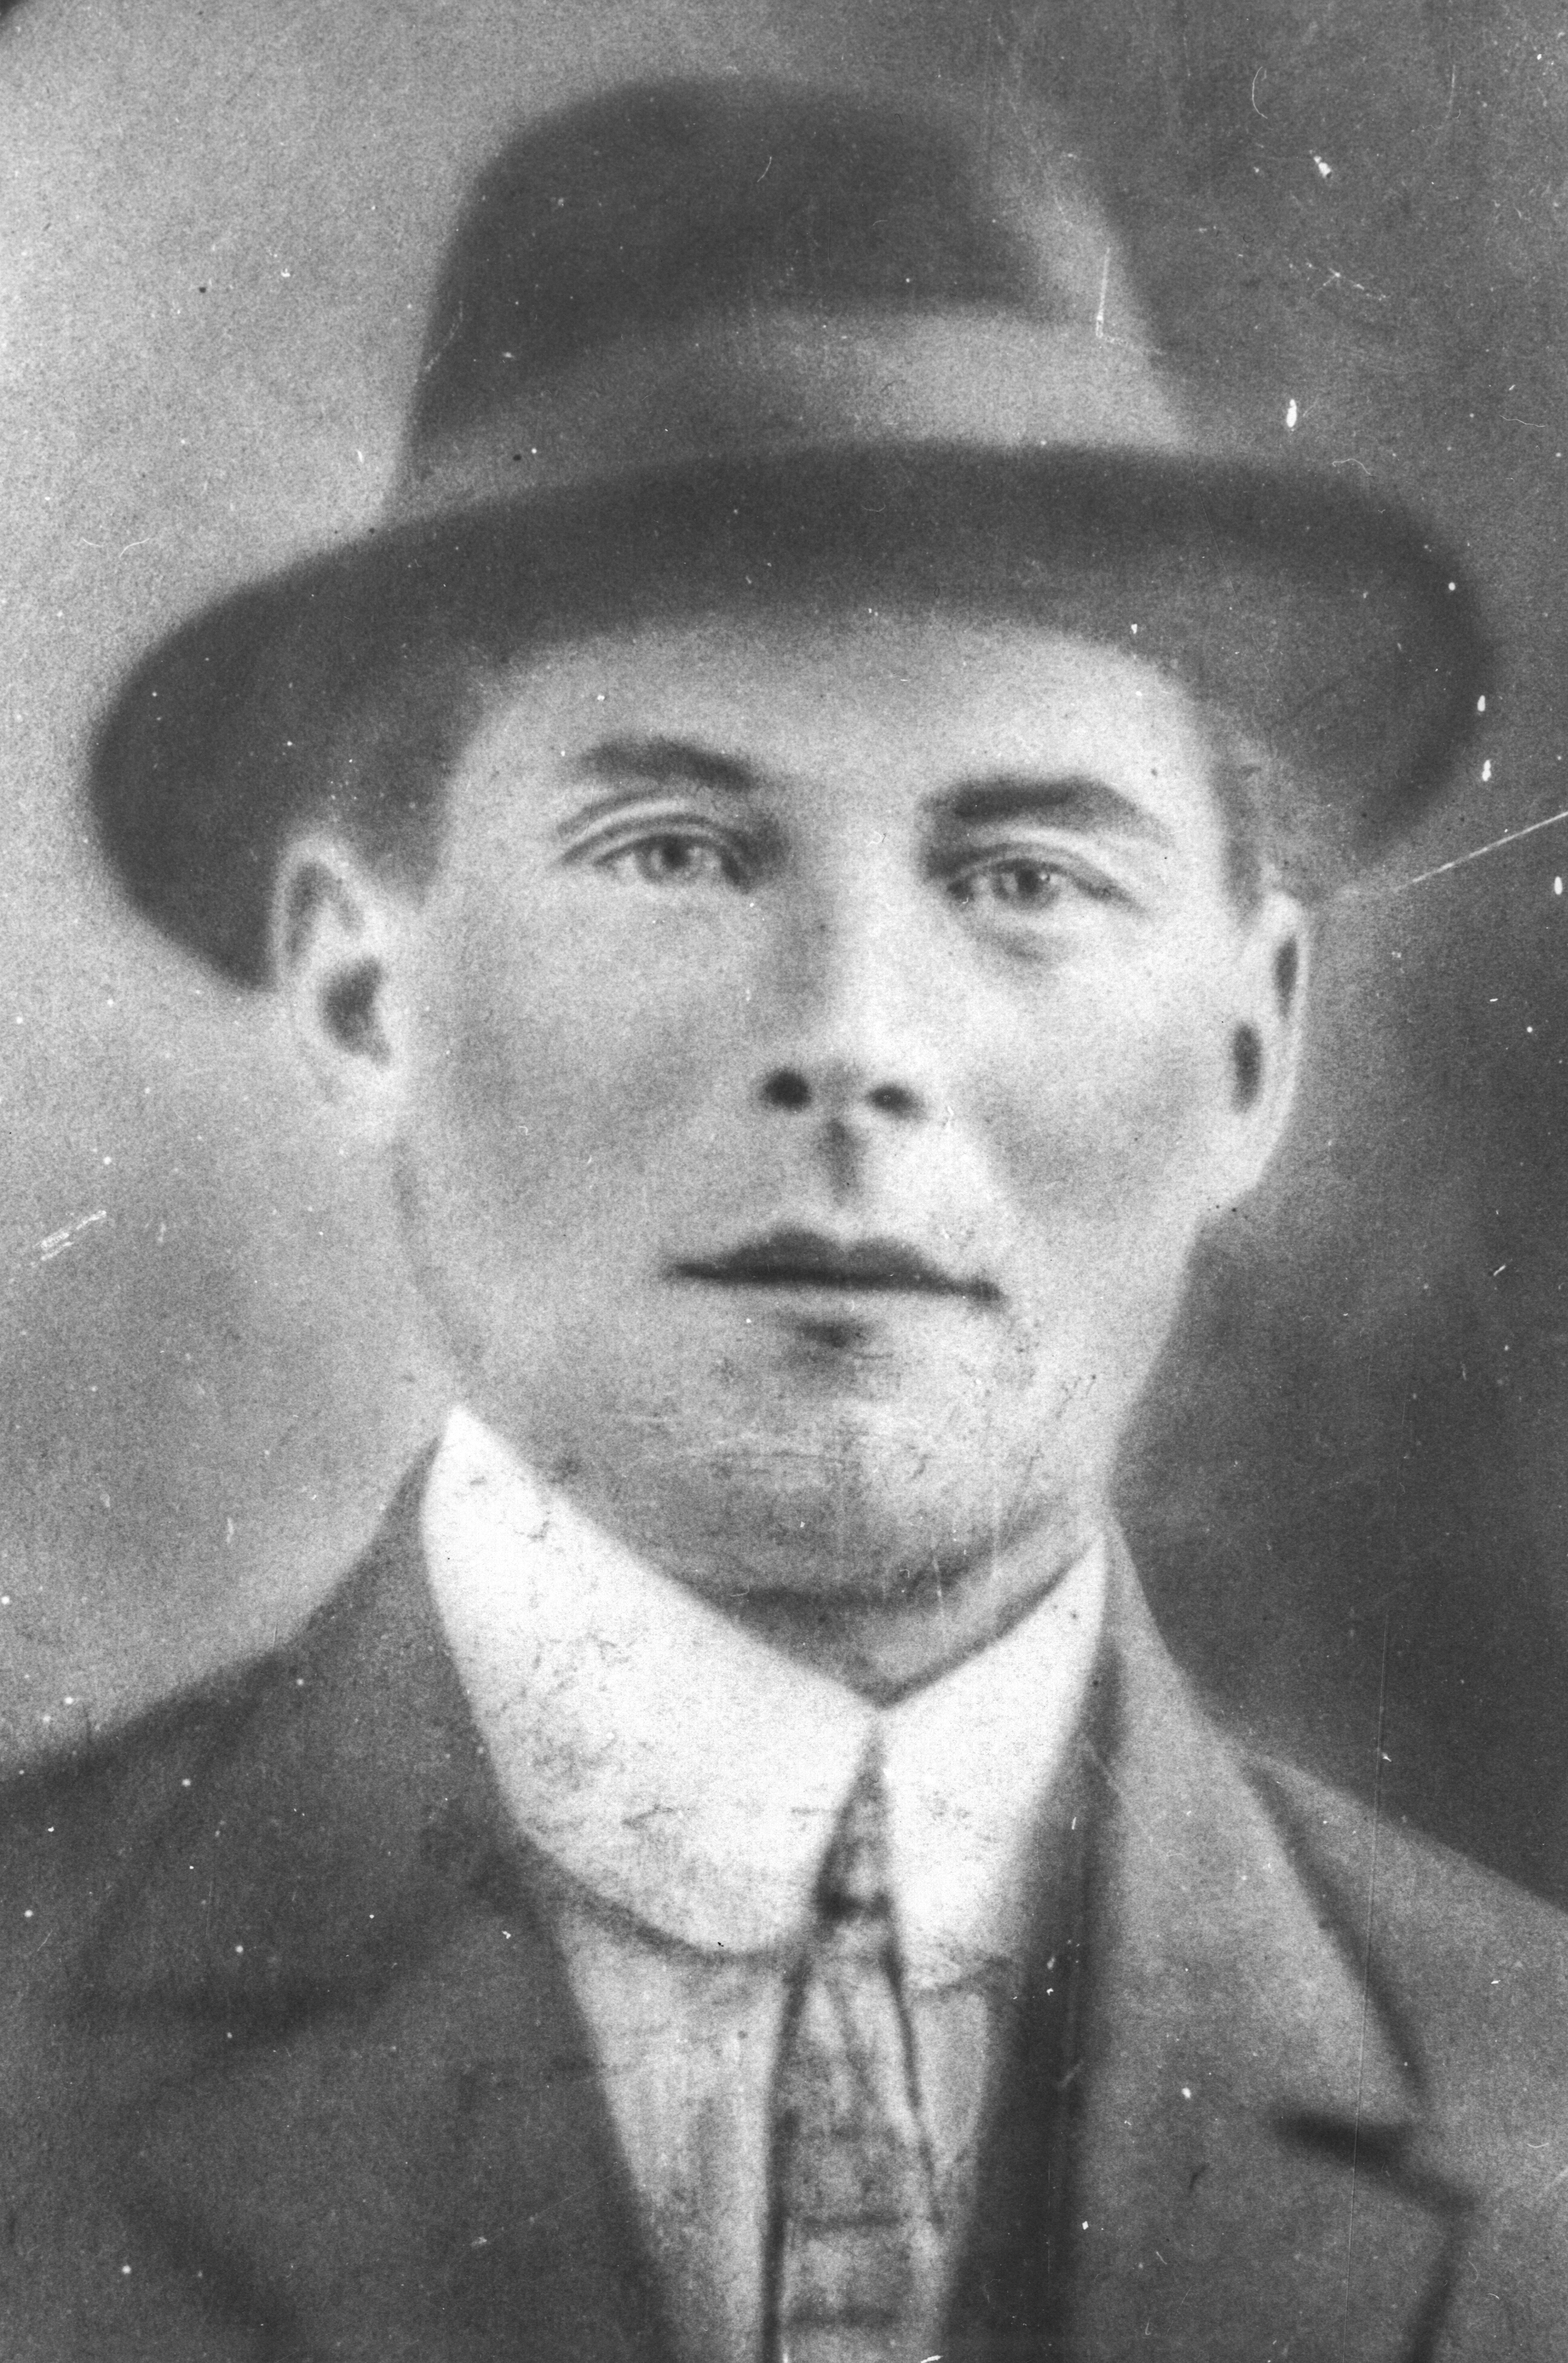 Black and white archival photograph of a man wearing a fedora hat, suit, and tie.